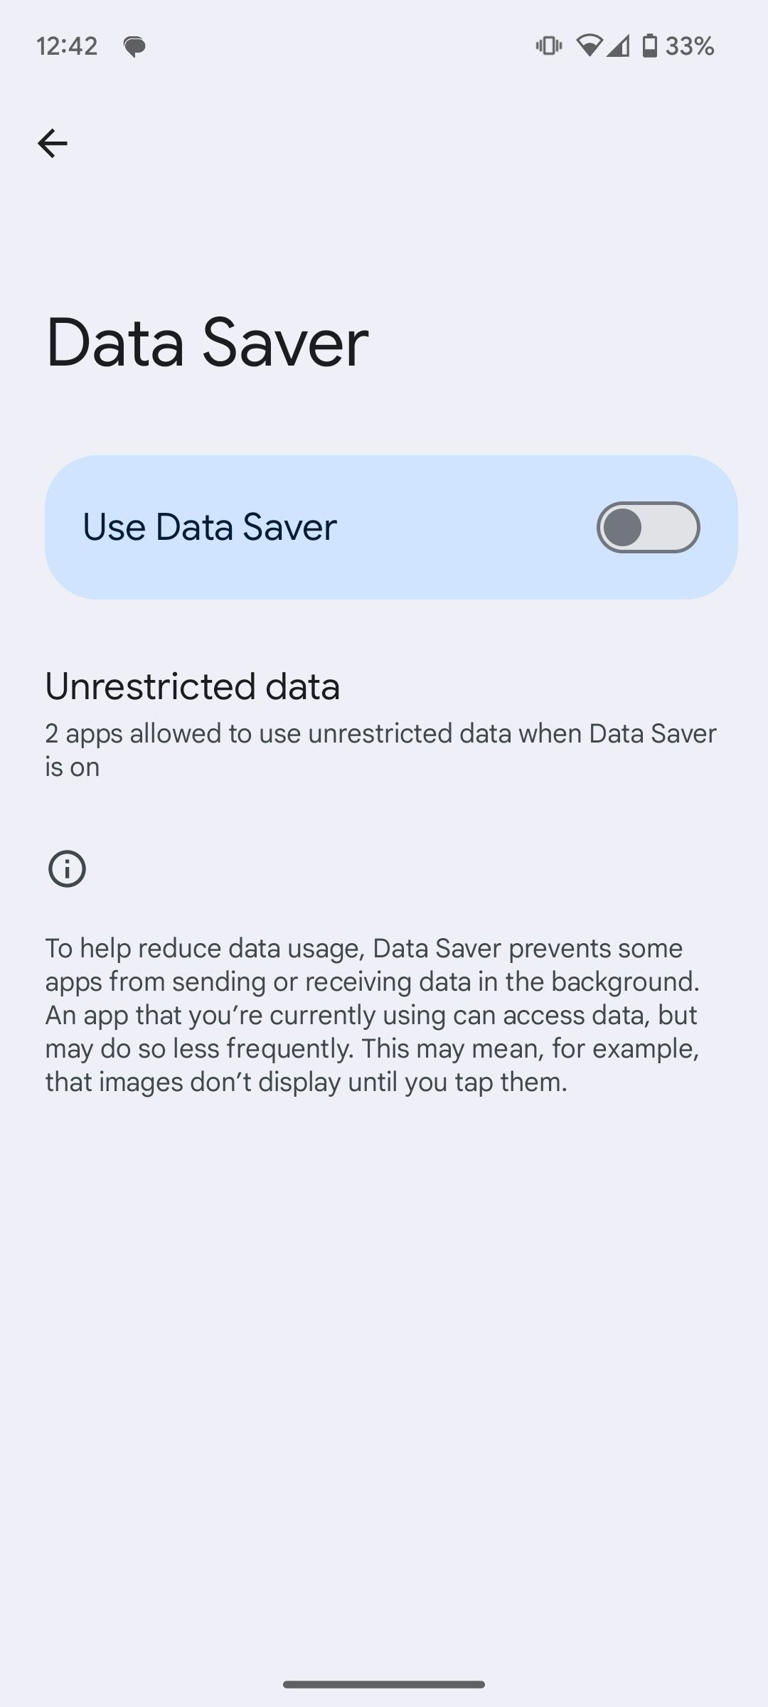 use data saver toggle on data saver page in Android settings